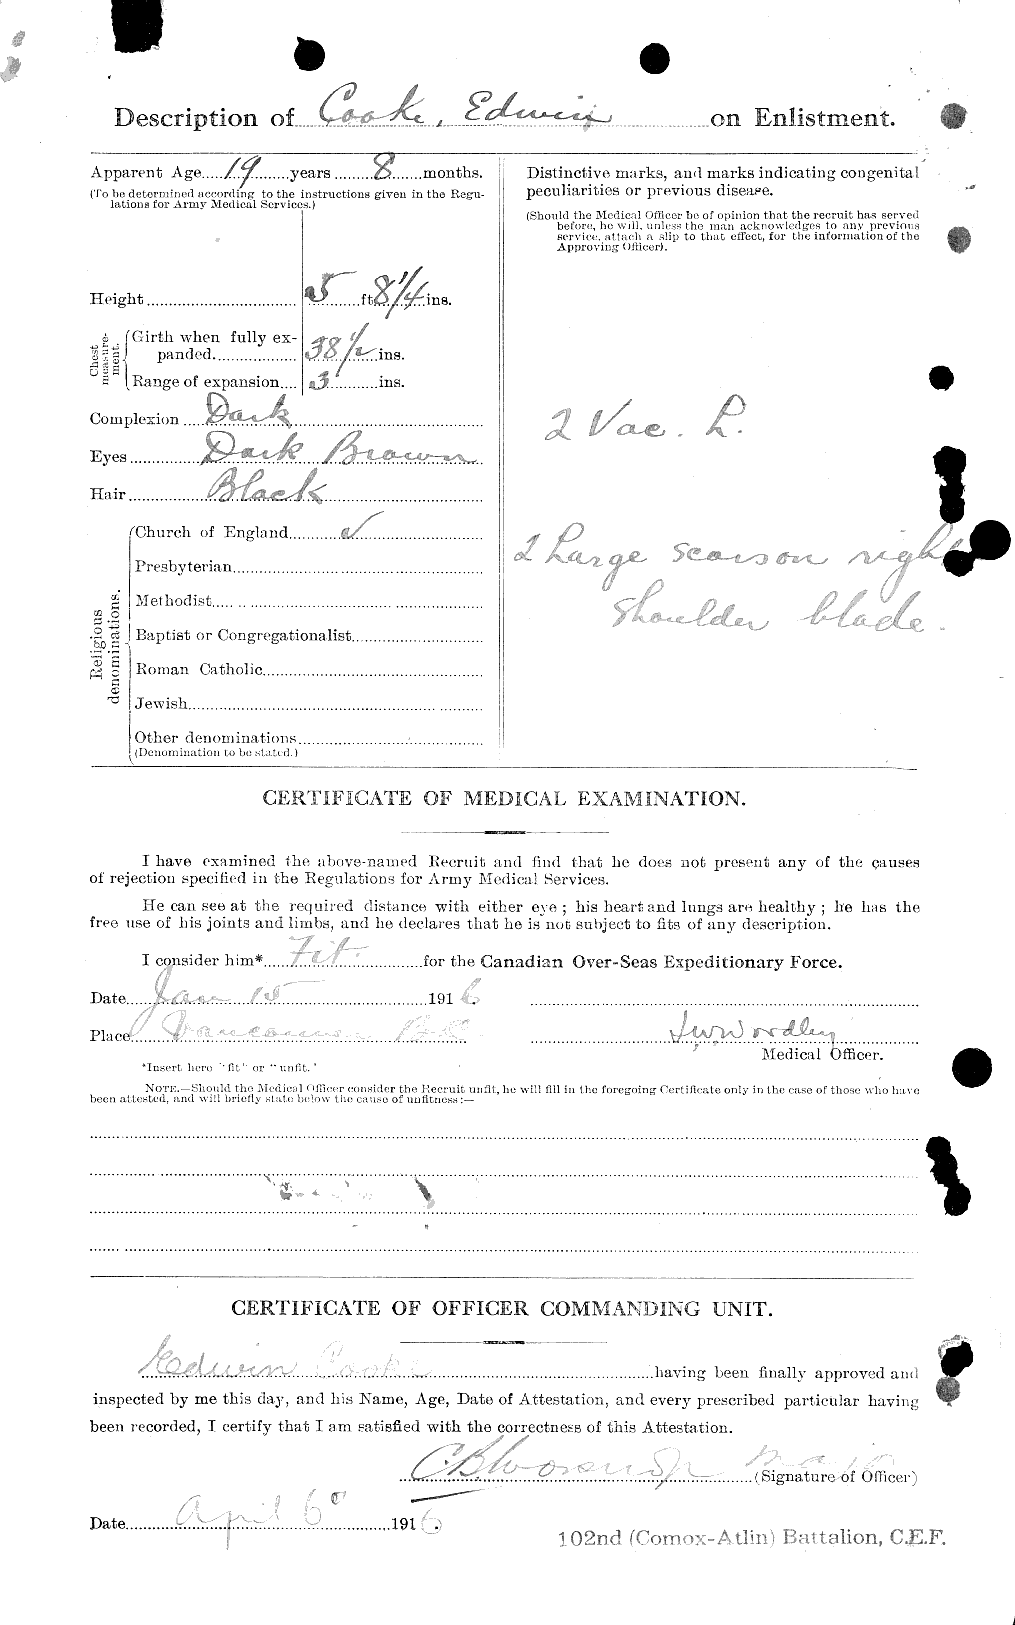 Personnel Records of the First World War - CEF 041286b